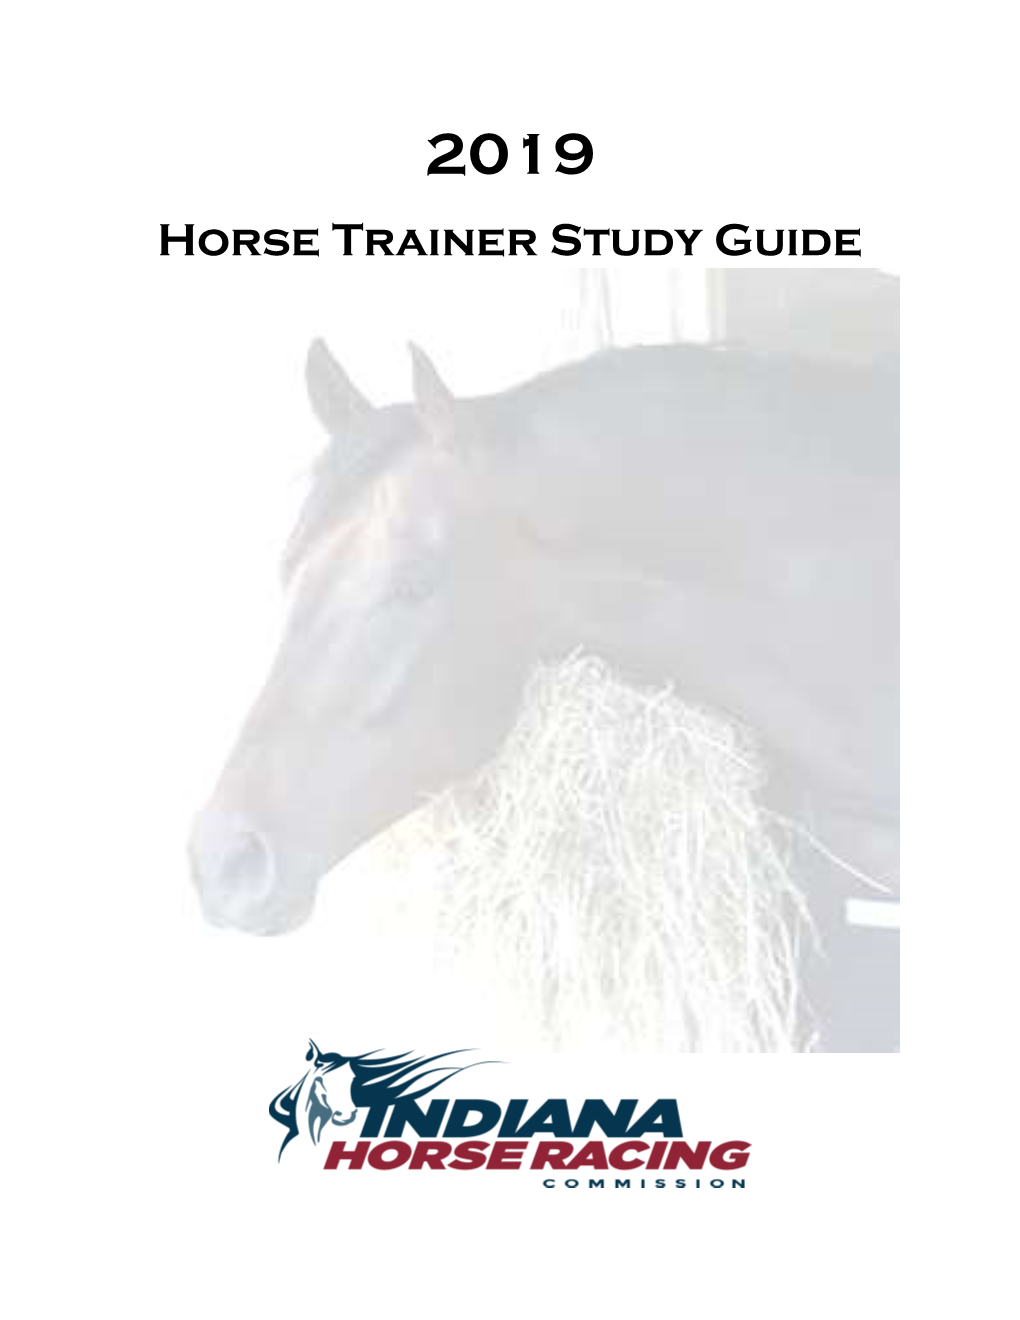 Horse Trainer Study Guide